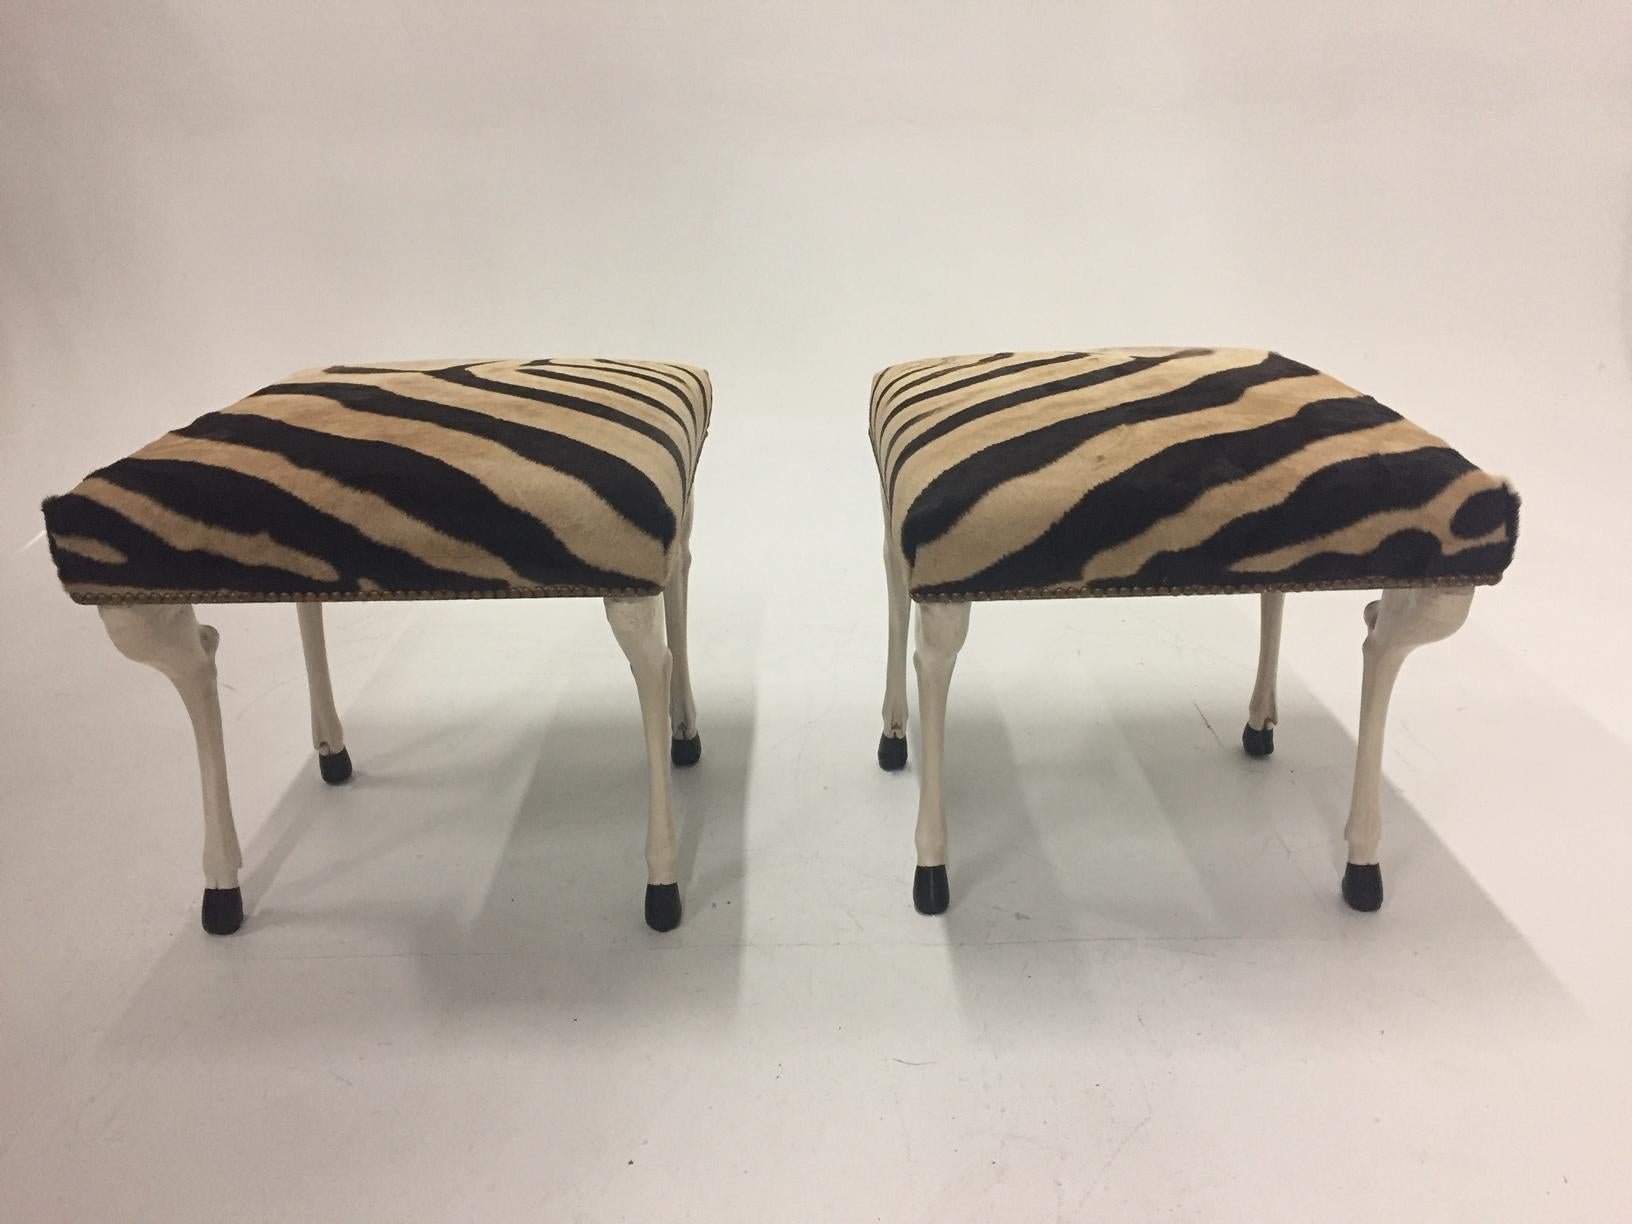 North American Pair of Stunning Custom One of a Kind Zebra Ottomans